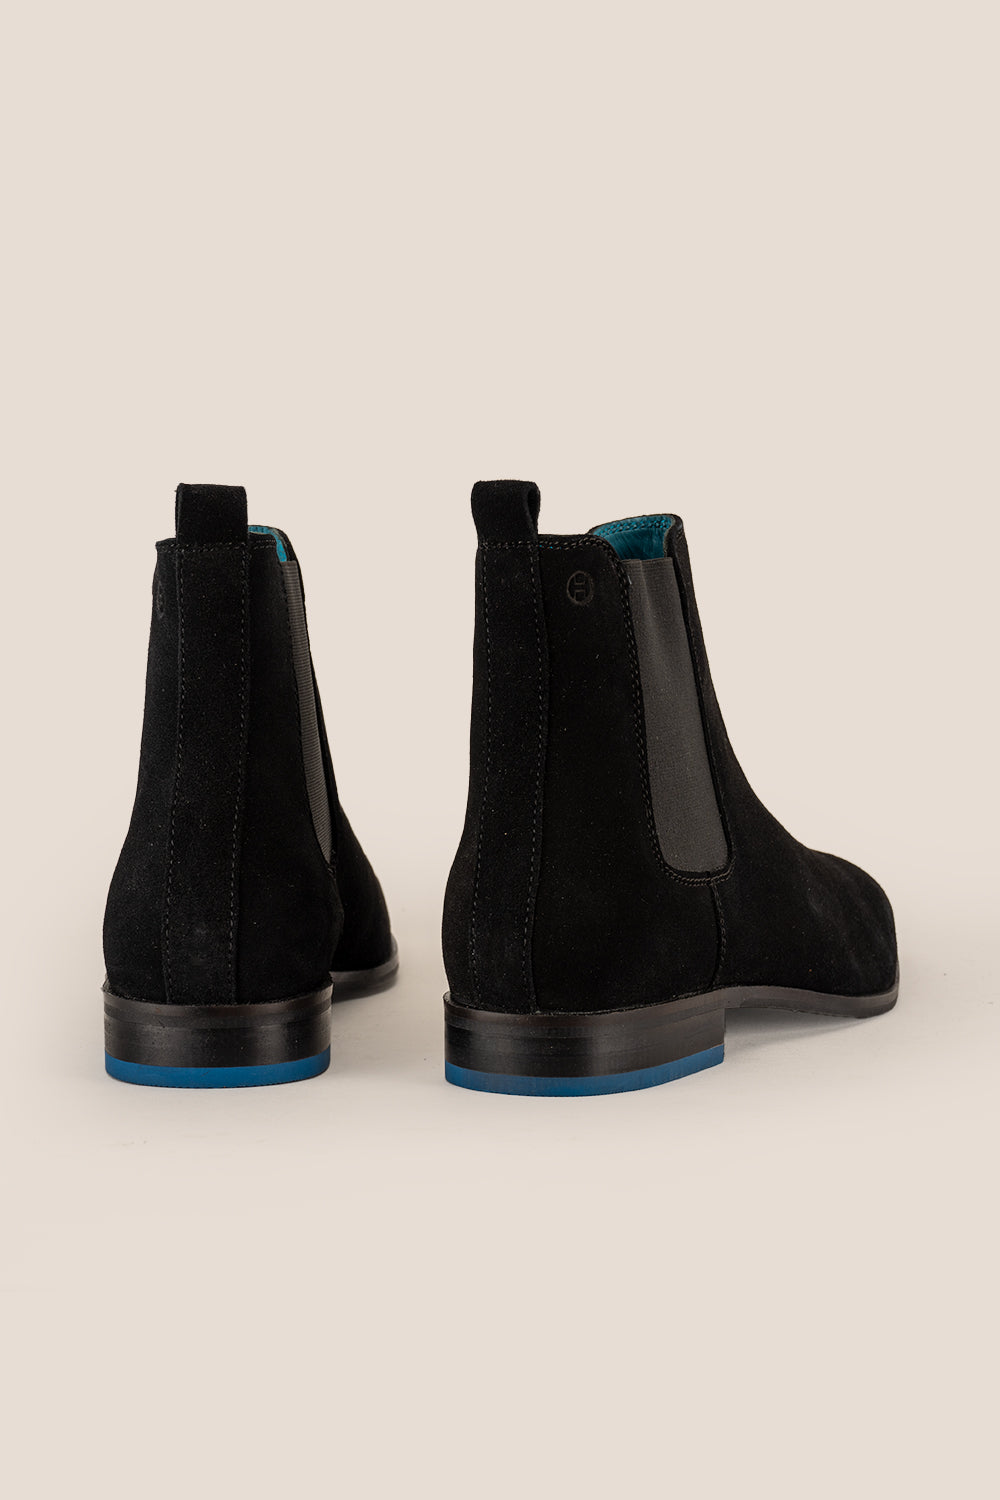 Vinnie Black Suede Chelsea Boots | Oswin Hyde